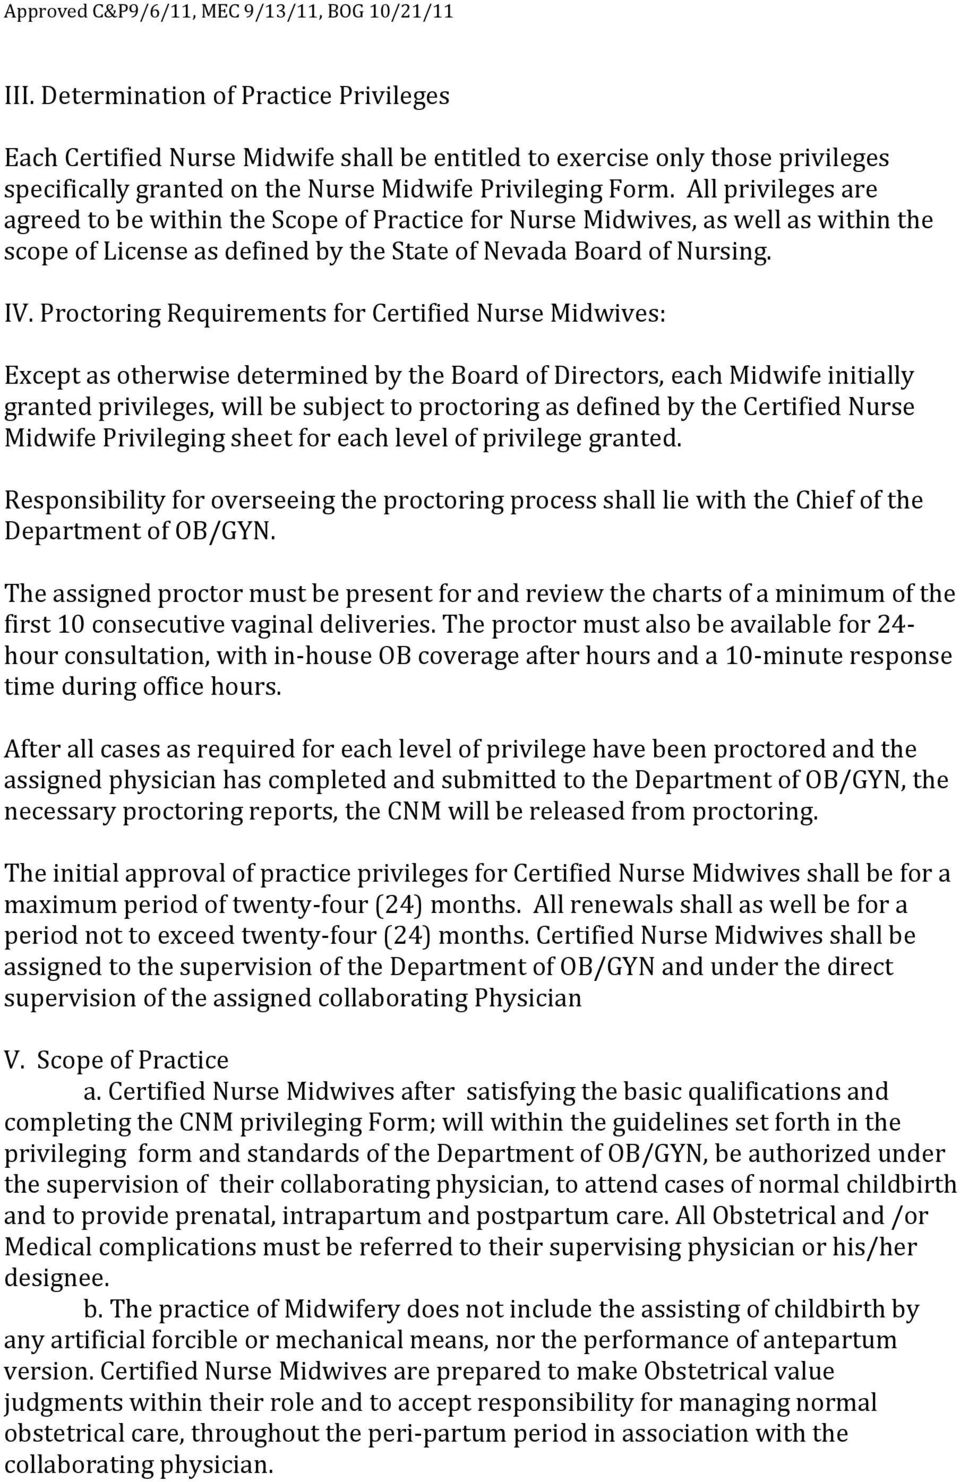 Proctoring Requirements for Certified Nurse Midwives: Except as otherwise determined by the Board of Directors, each Midwife initially granted privileges, will be subject to proctoring as defined by